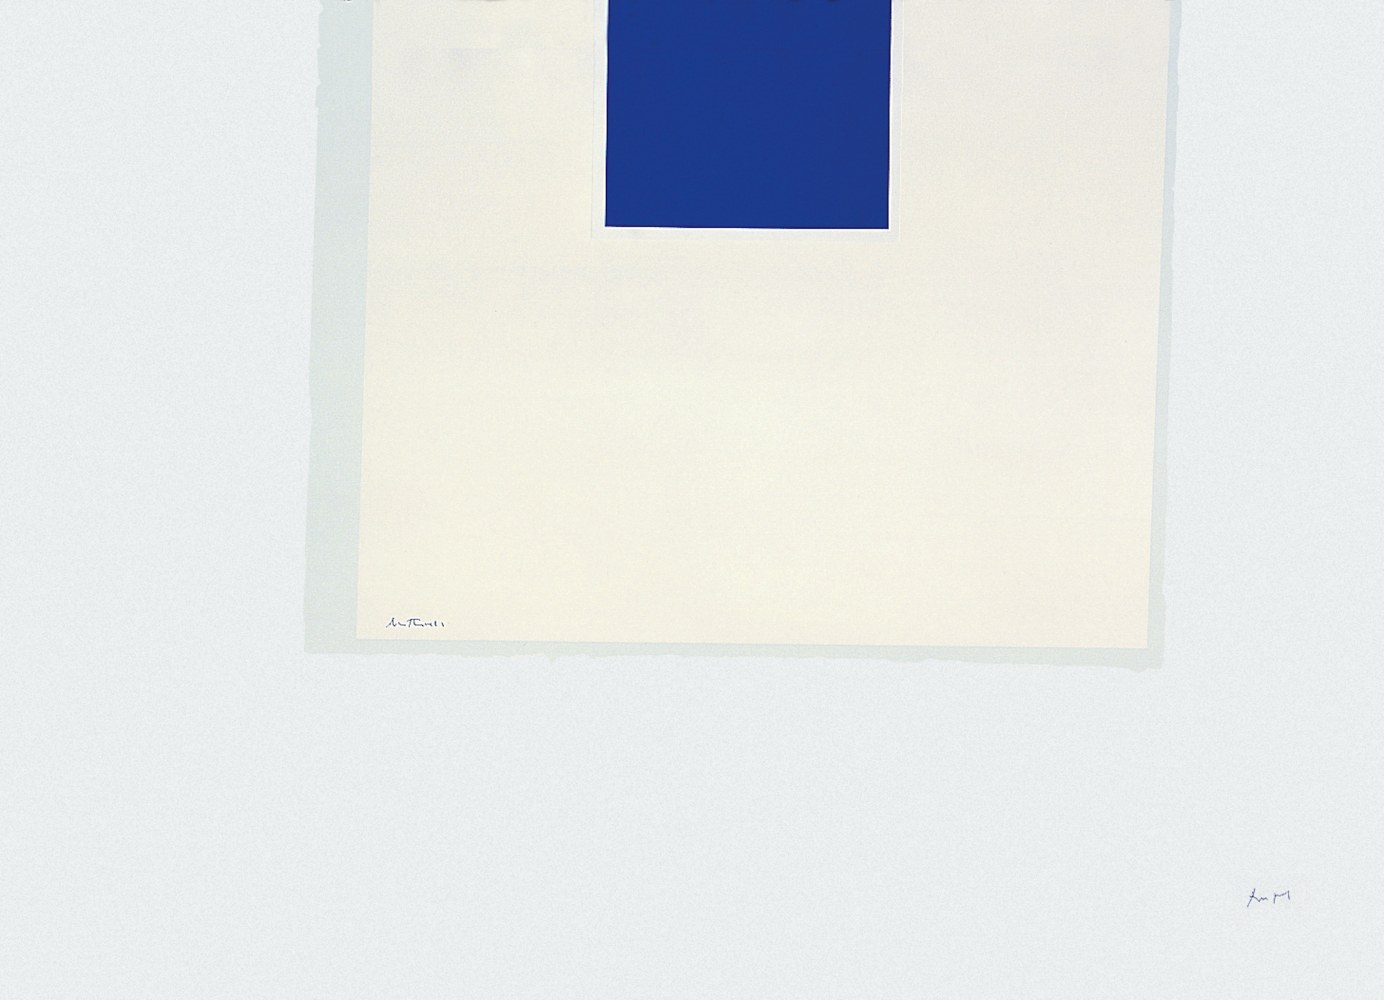 London Series II: Untitled (Blue/Cream), 1971

screenprint on white J.B. Green mould-made Double Elephant paper, edition of 150

28 1/2 x 41 in. / 71.8 x 104.1 cm